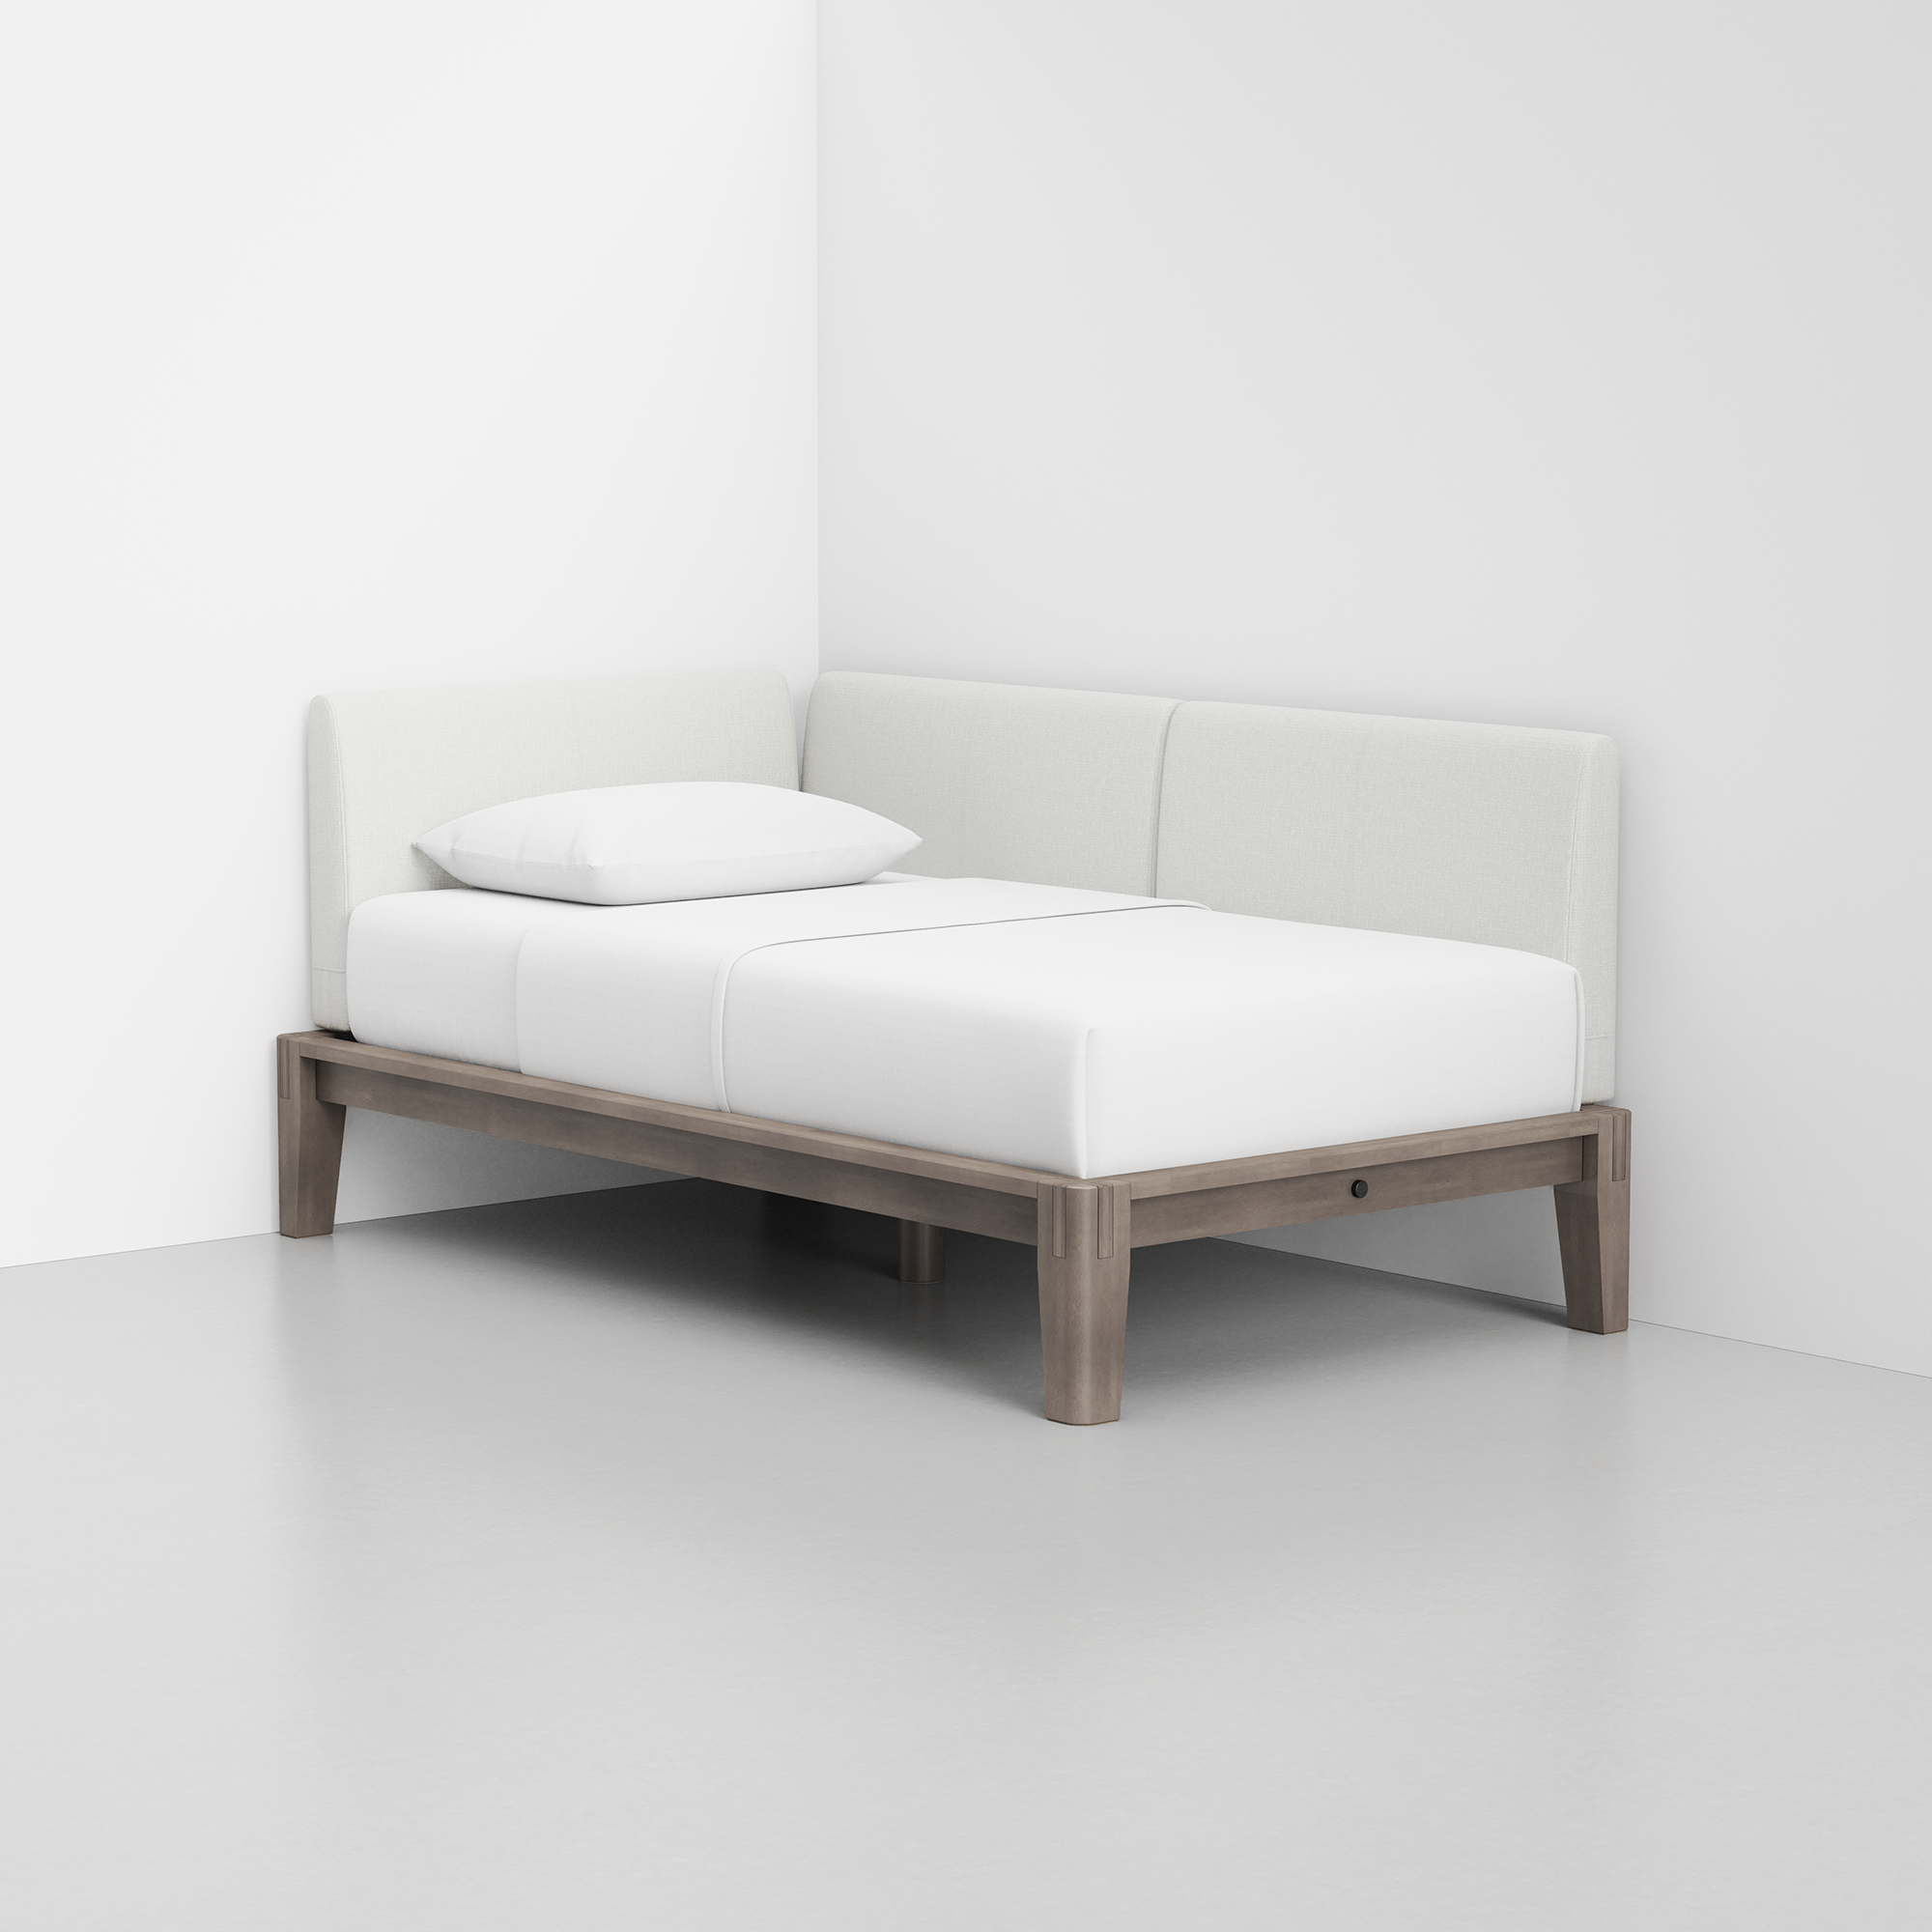 PDP Image: The Daybed (Grey / Light Linen) - Rendering - Front